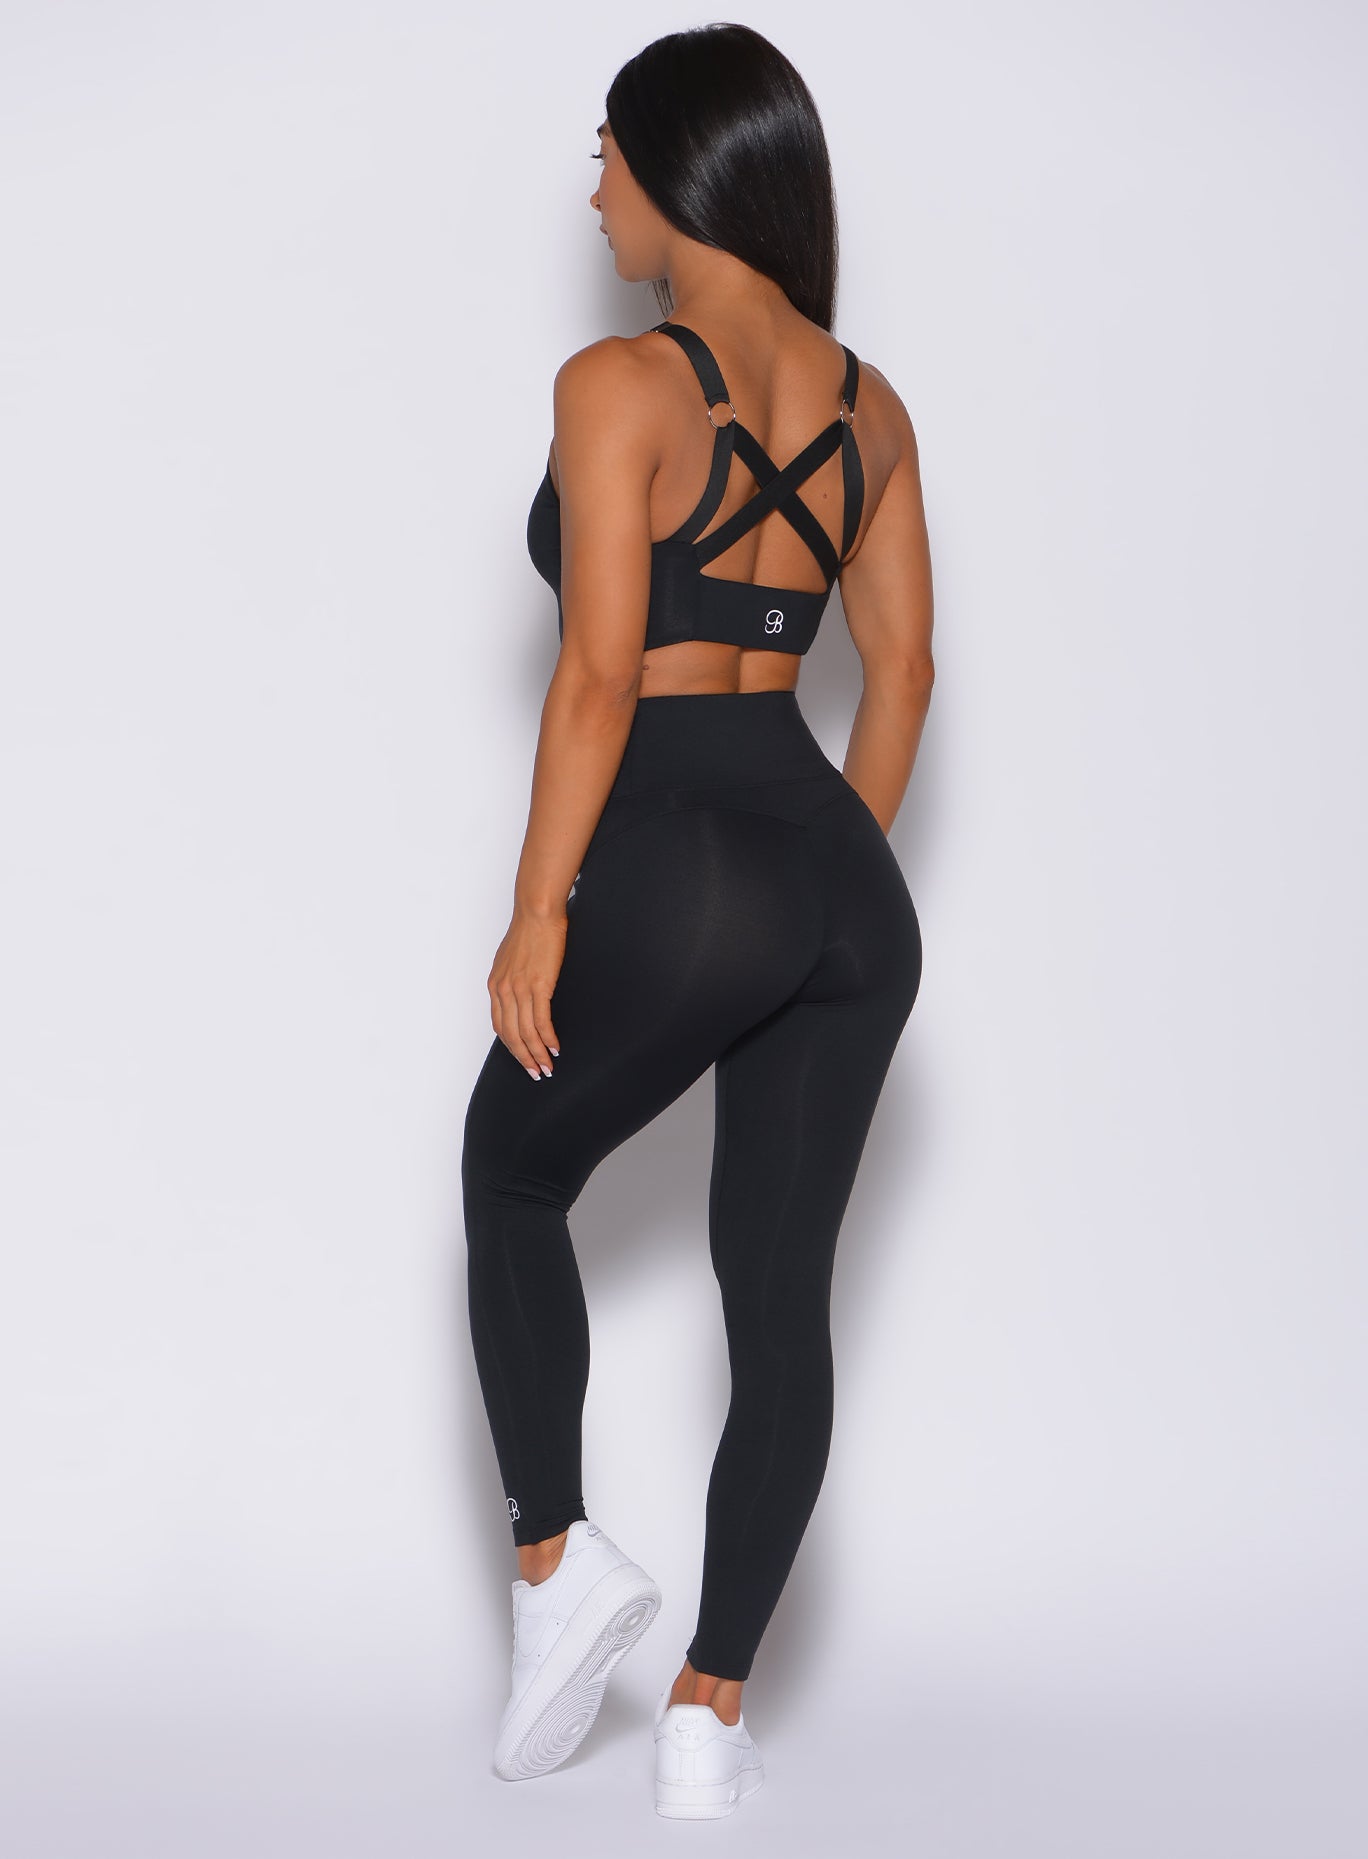 Back profile view of a model in our black snatched waist leggings and a matching bra